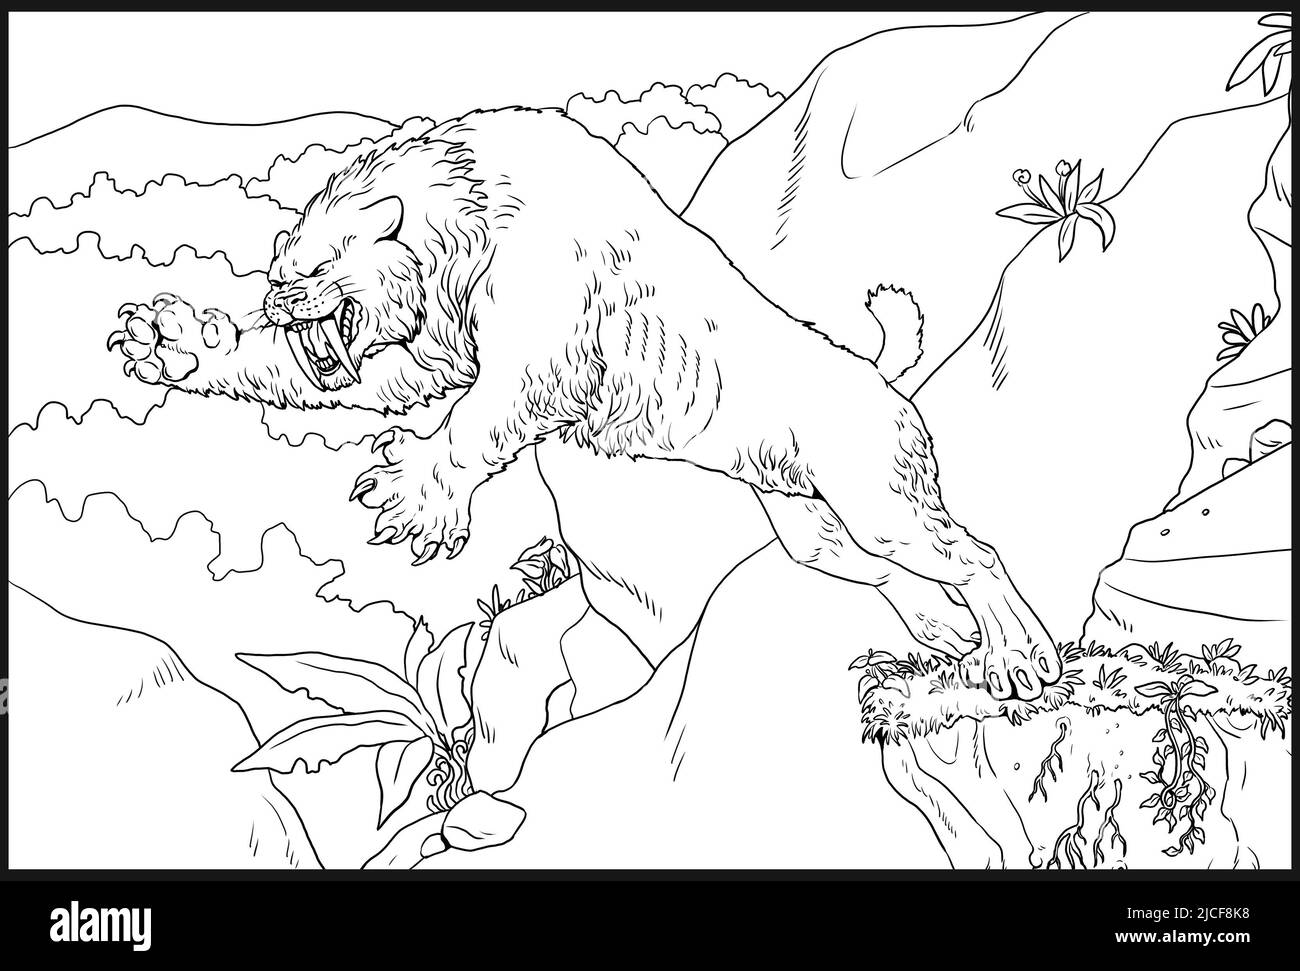 Drawing and Coloring Saber Toothed Tiger - How to Draw Prehistoric Monster  the Smilodon - YouTube